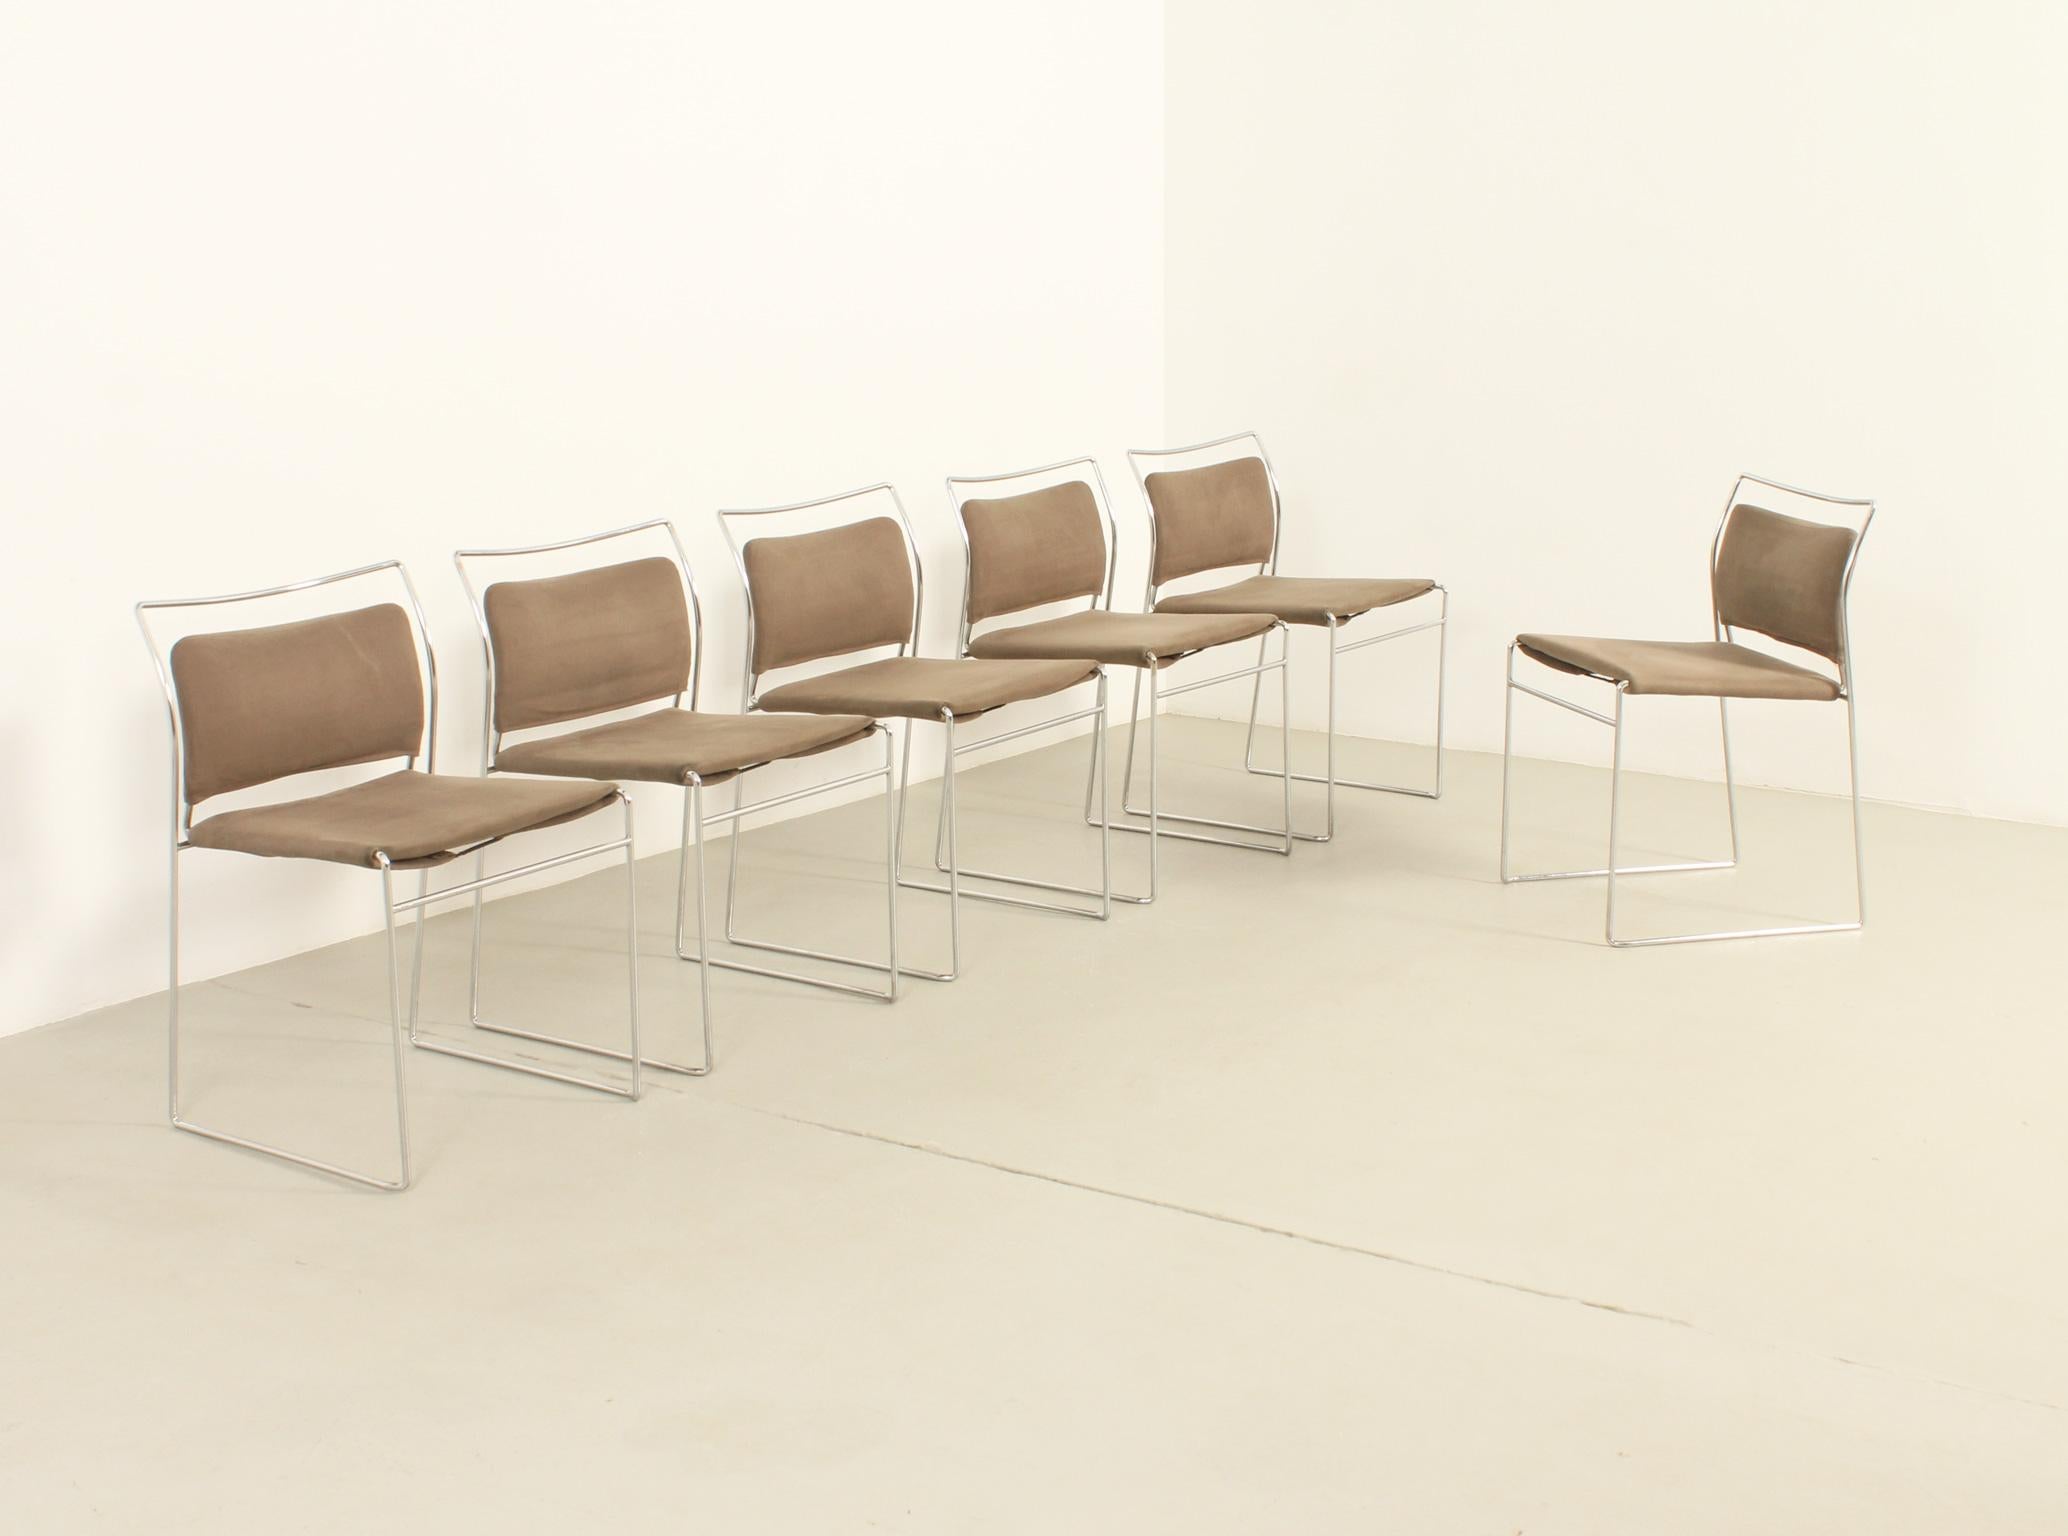 Set of six Tulu chairs designed in 1967 by Japanese architect and designer Kazuhide Takahama for Simon International, Italy. They are the Spanish edition for MYC, signed. Steel rod structure and upholstered in original Alcantara fabric.